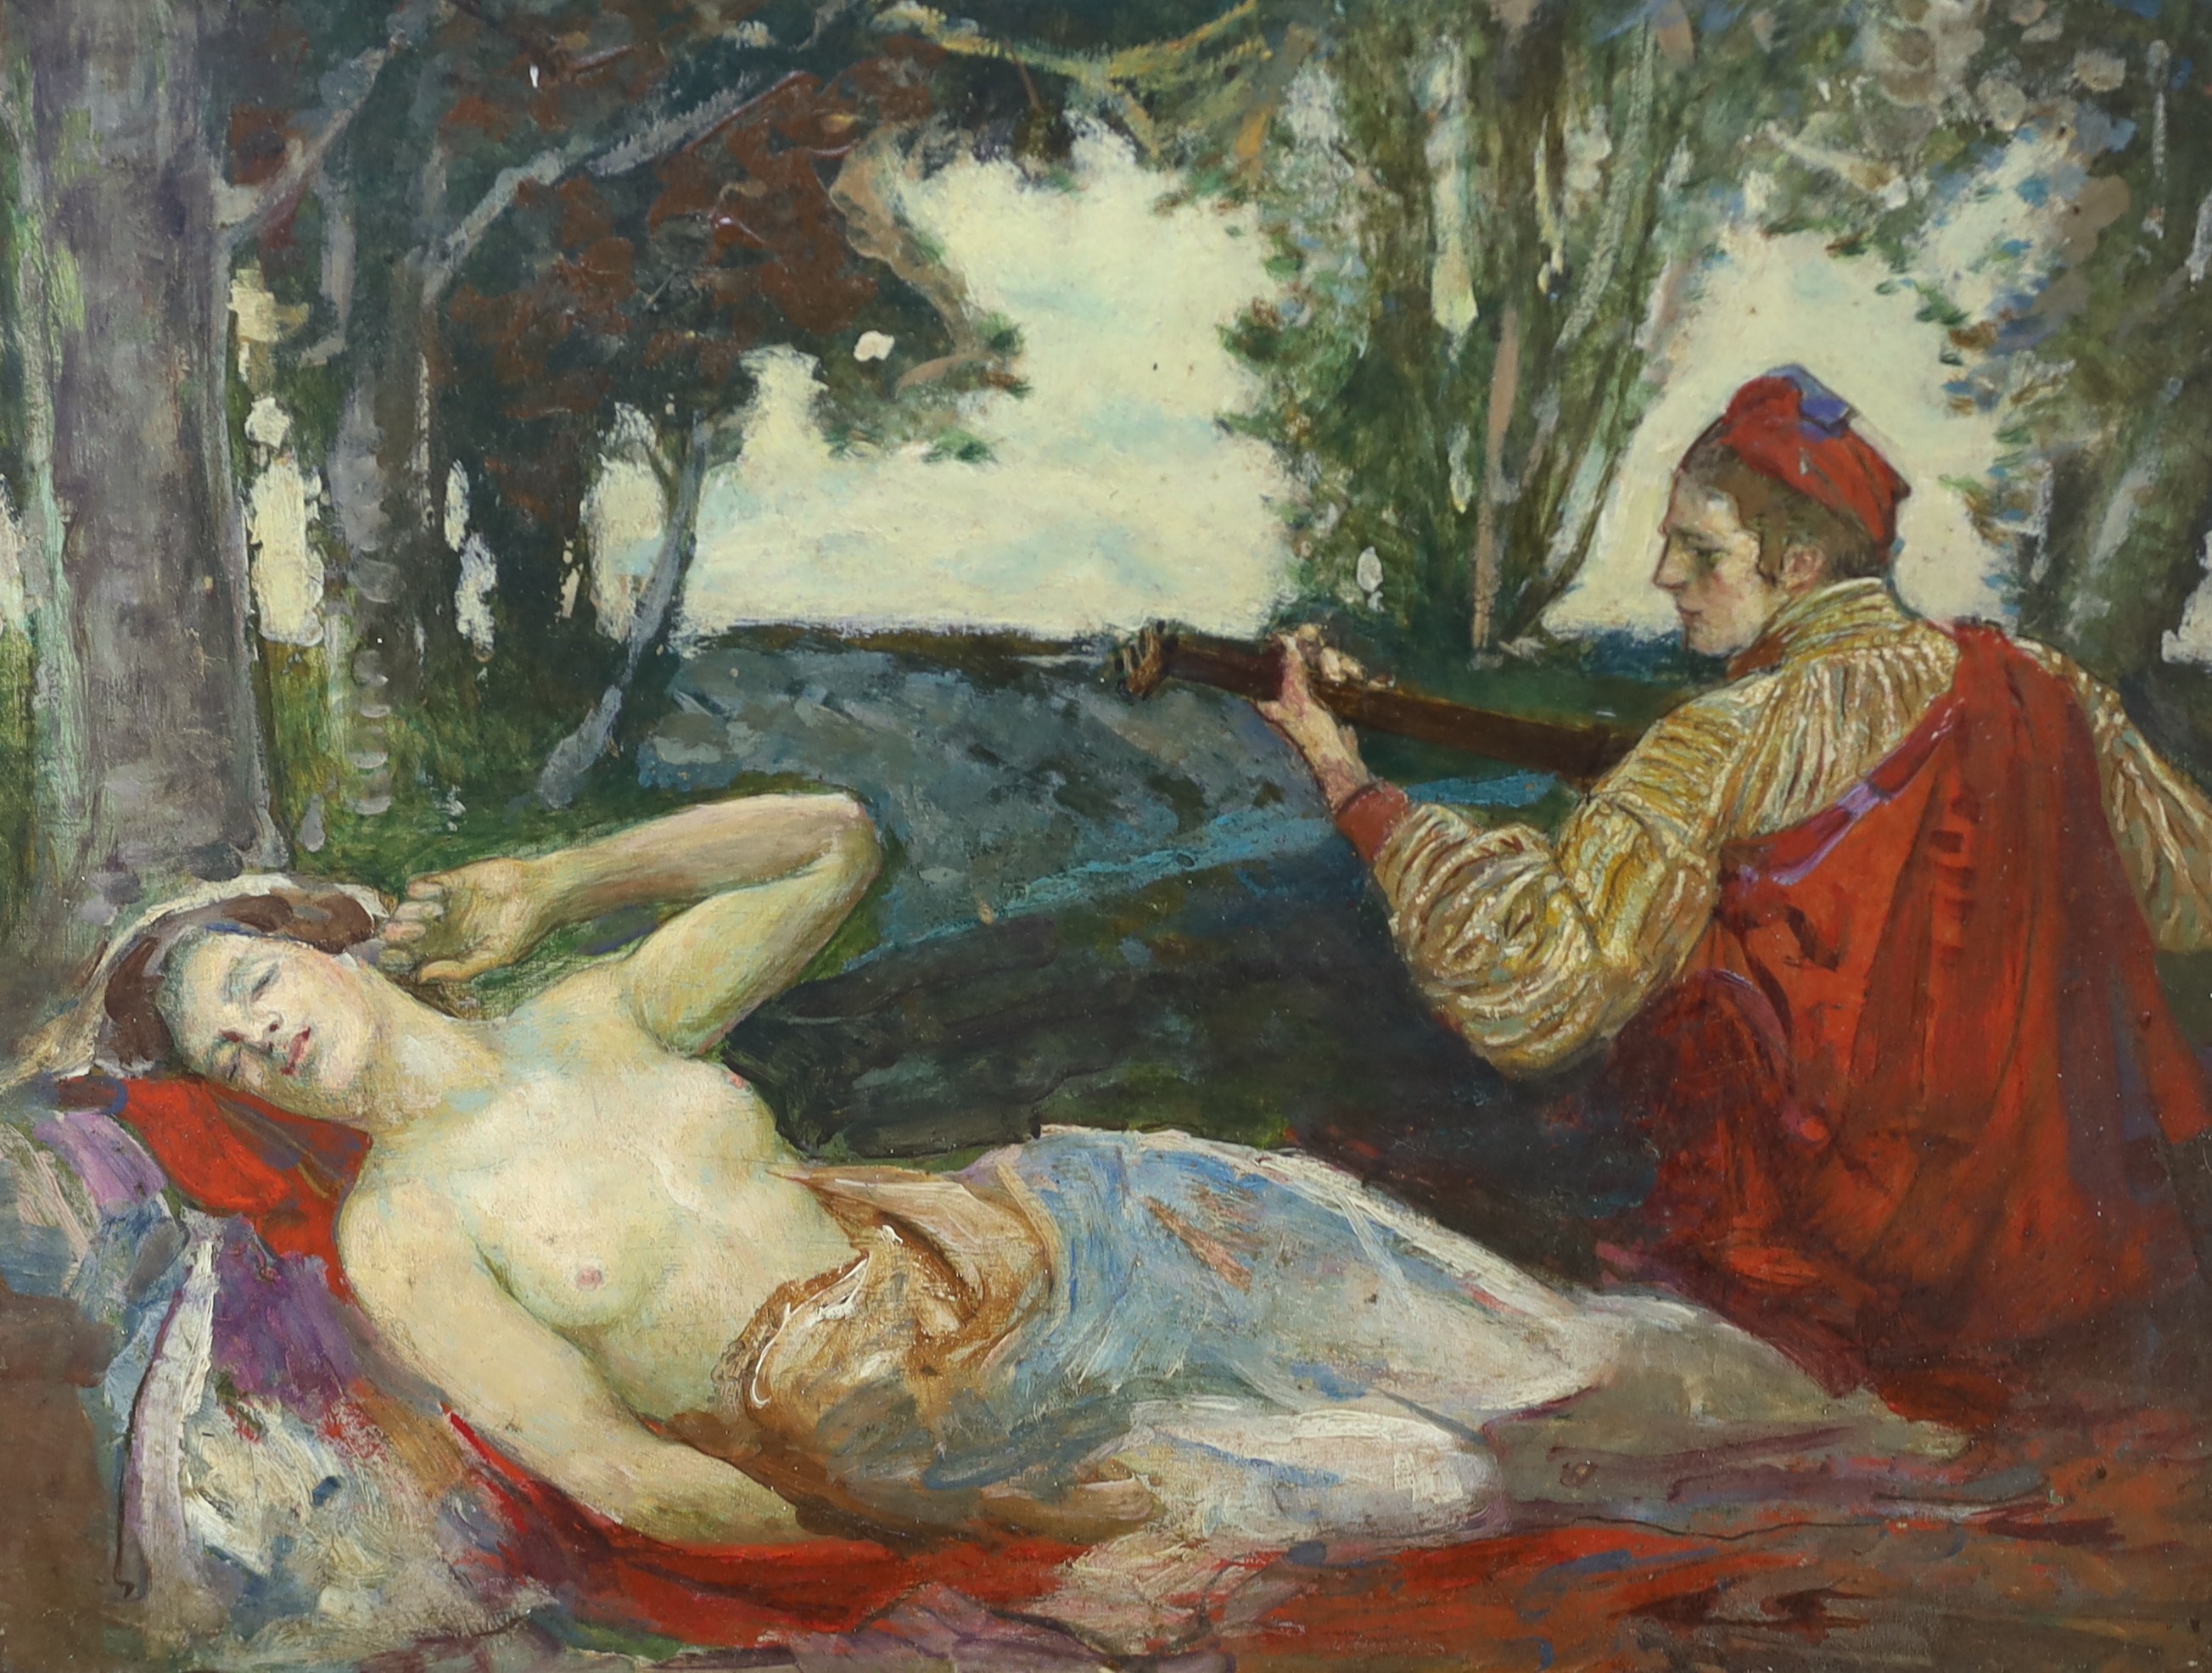 John Henry Amshewitz (SA 1882-1942), oil on wooden panel, Reclining nude and troubadour, signed verso, 26 x 34cm